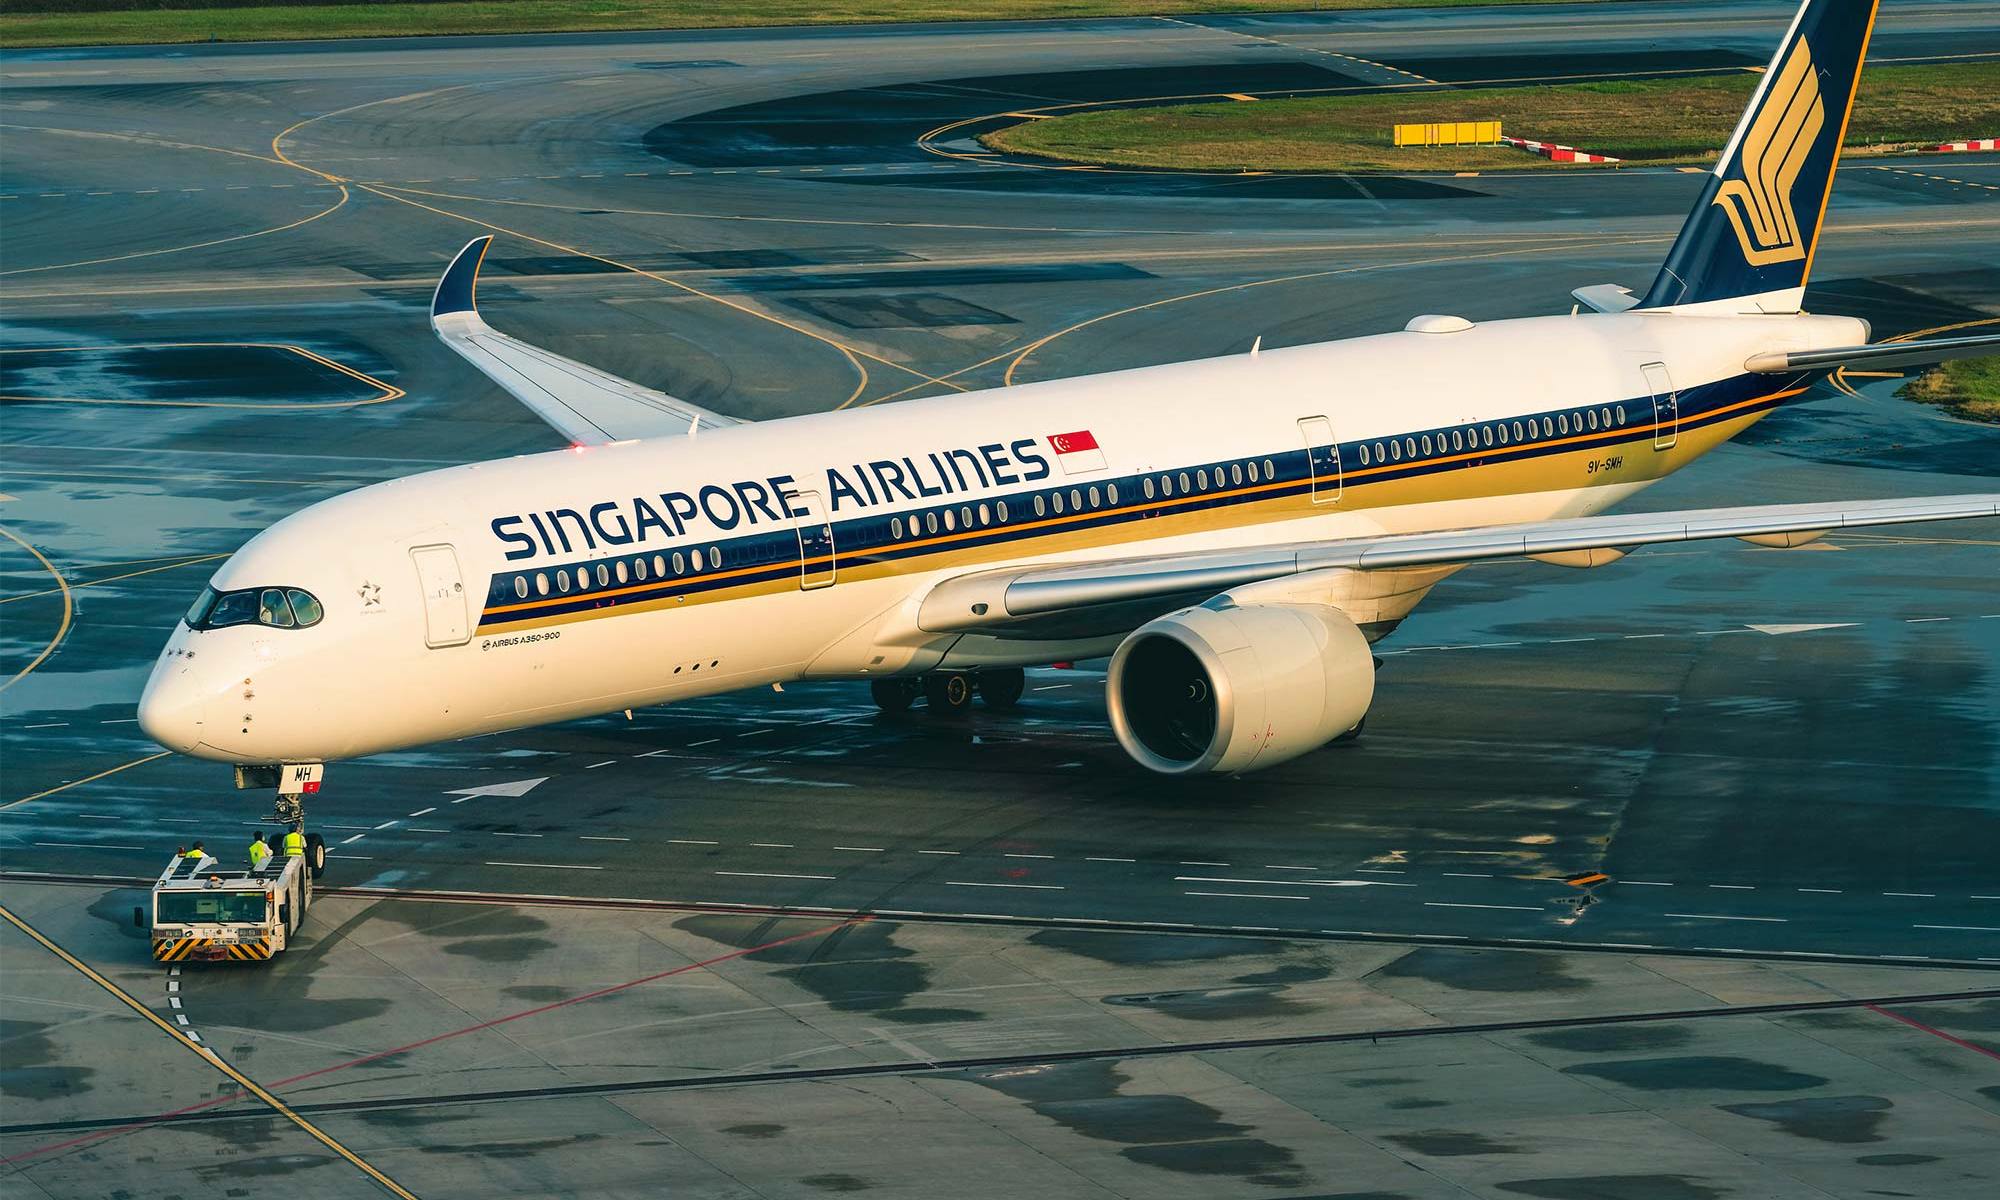 Changi Airport Terminal 2 Row 3 - Picture of Singapore Airlines